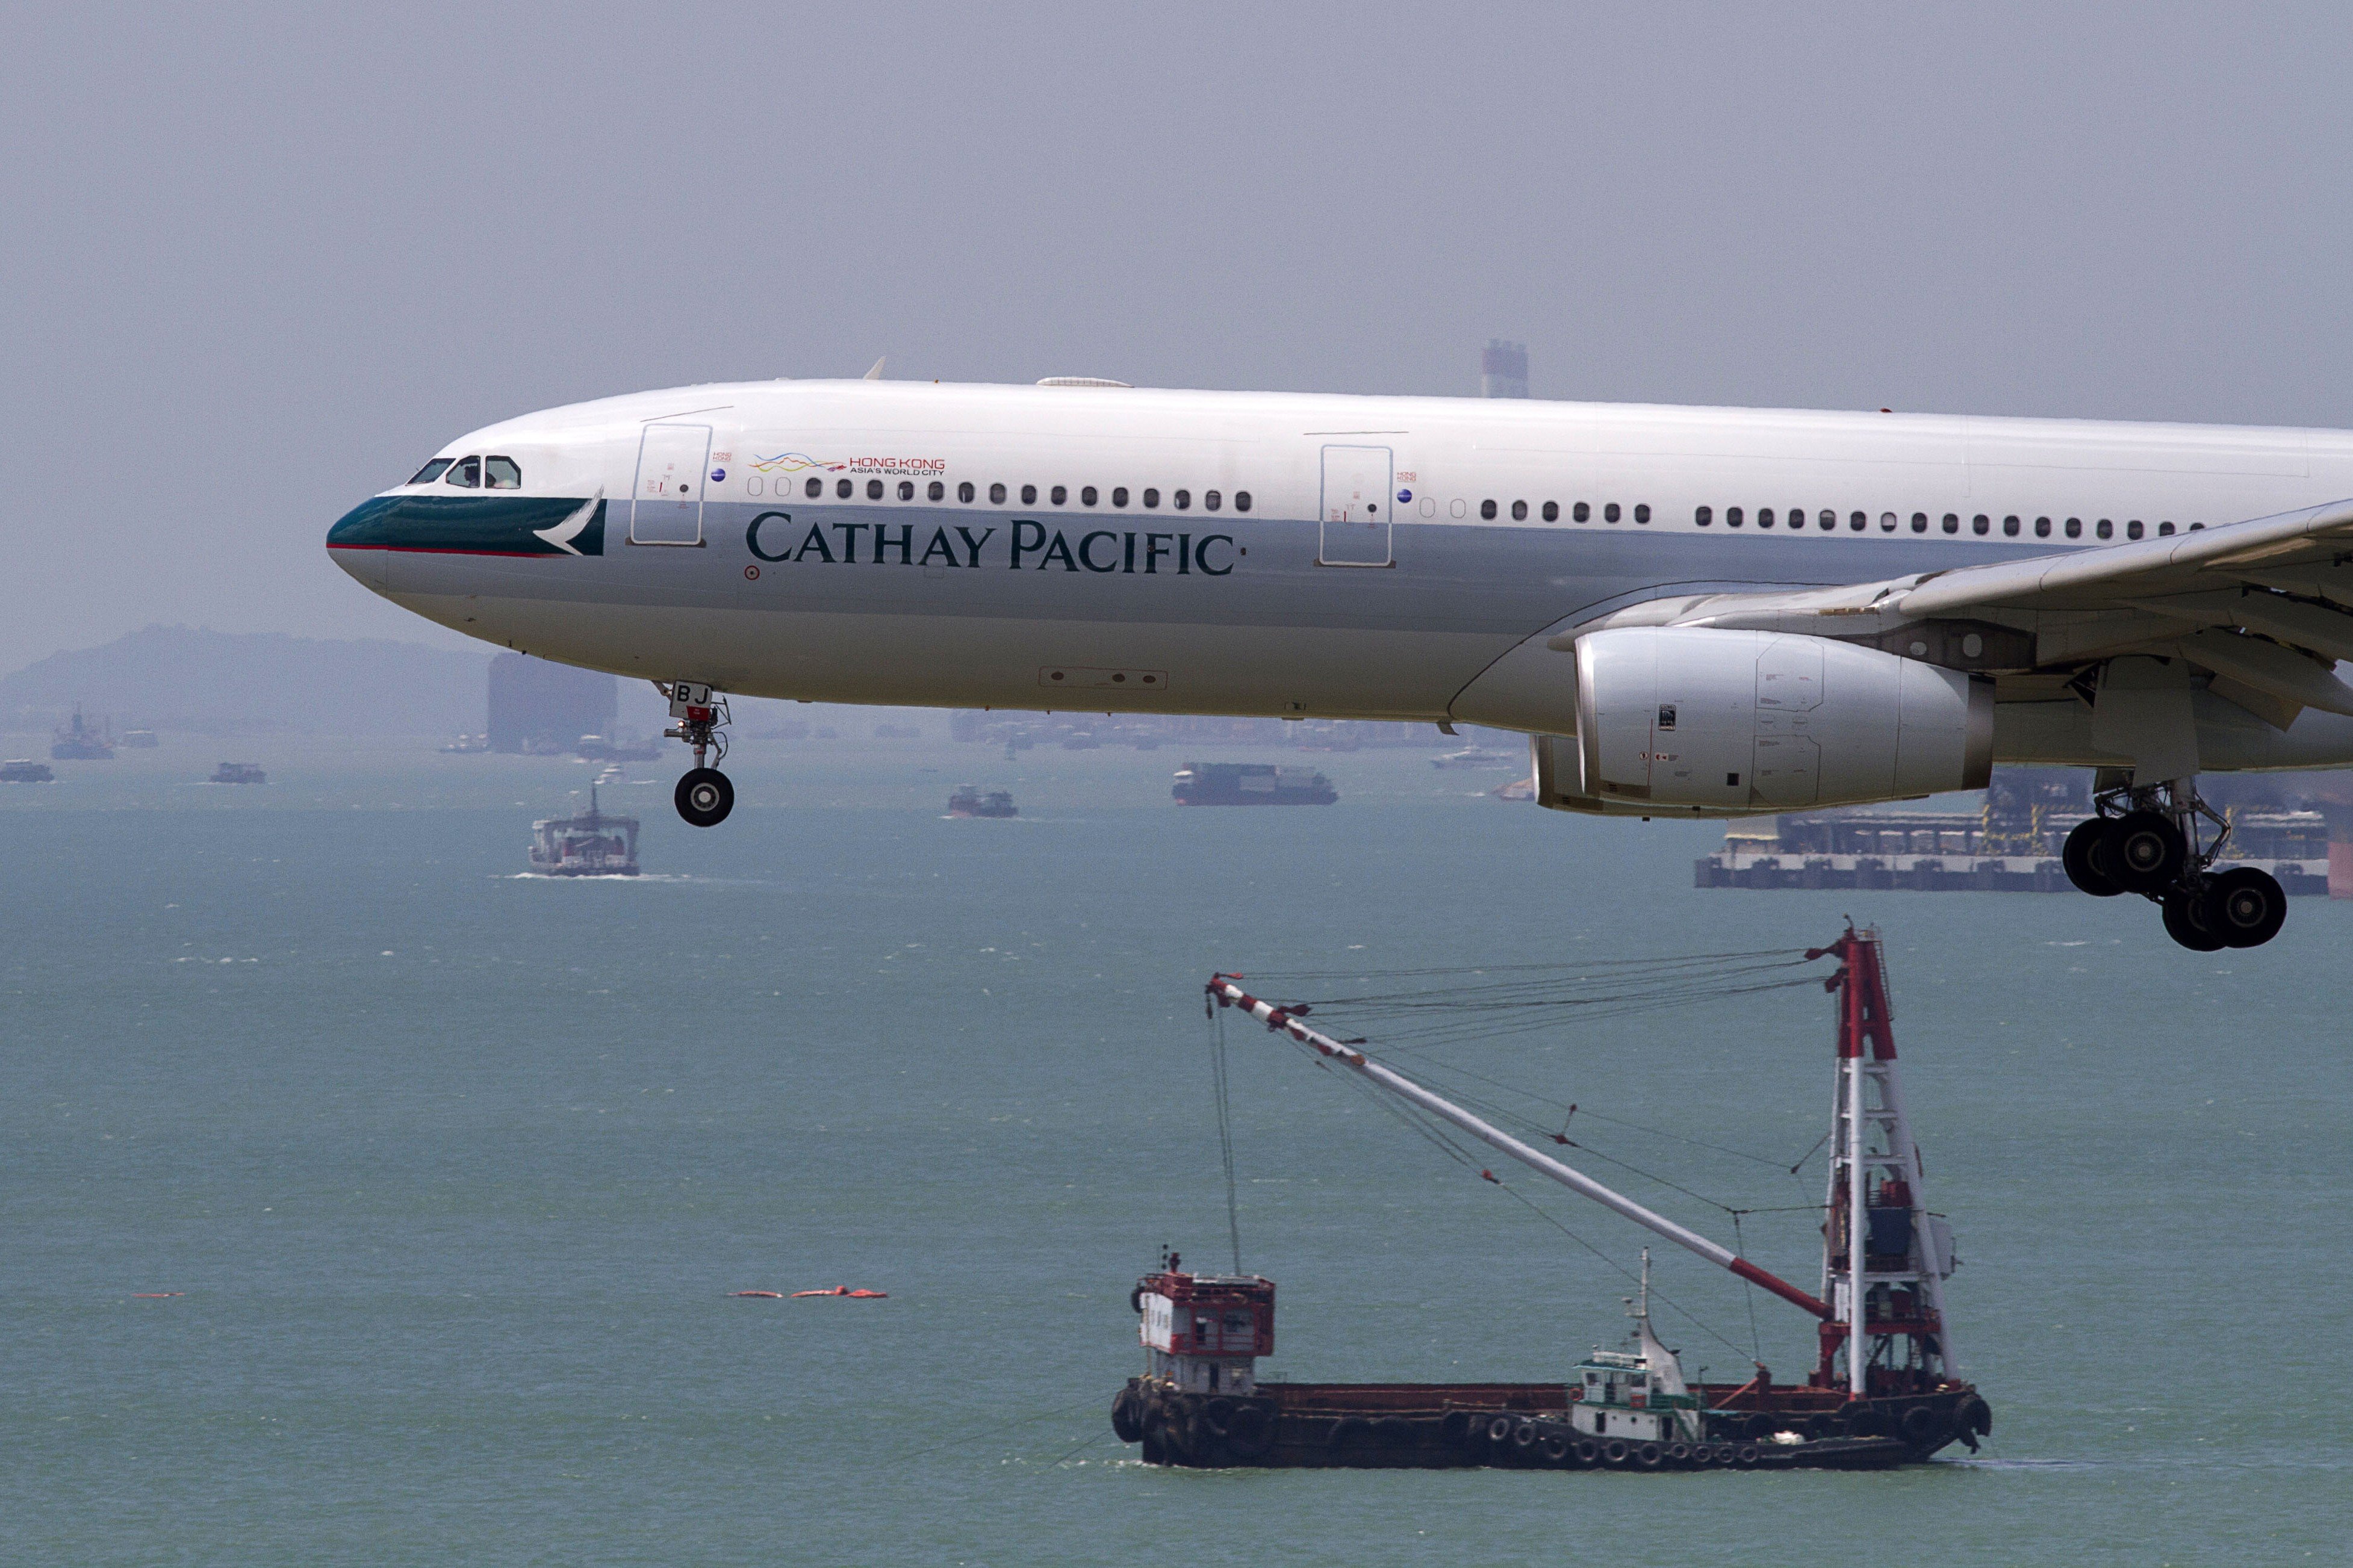 Cathay Pacific made changes to boost revenue and restore brand and service value after an annual loss in 2016. Photo: Bloomberg